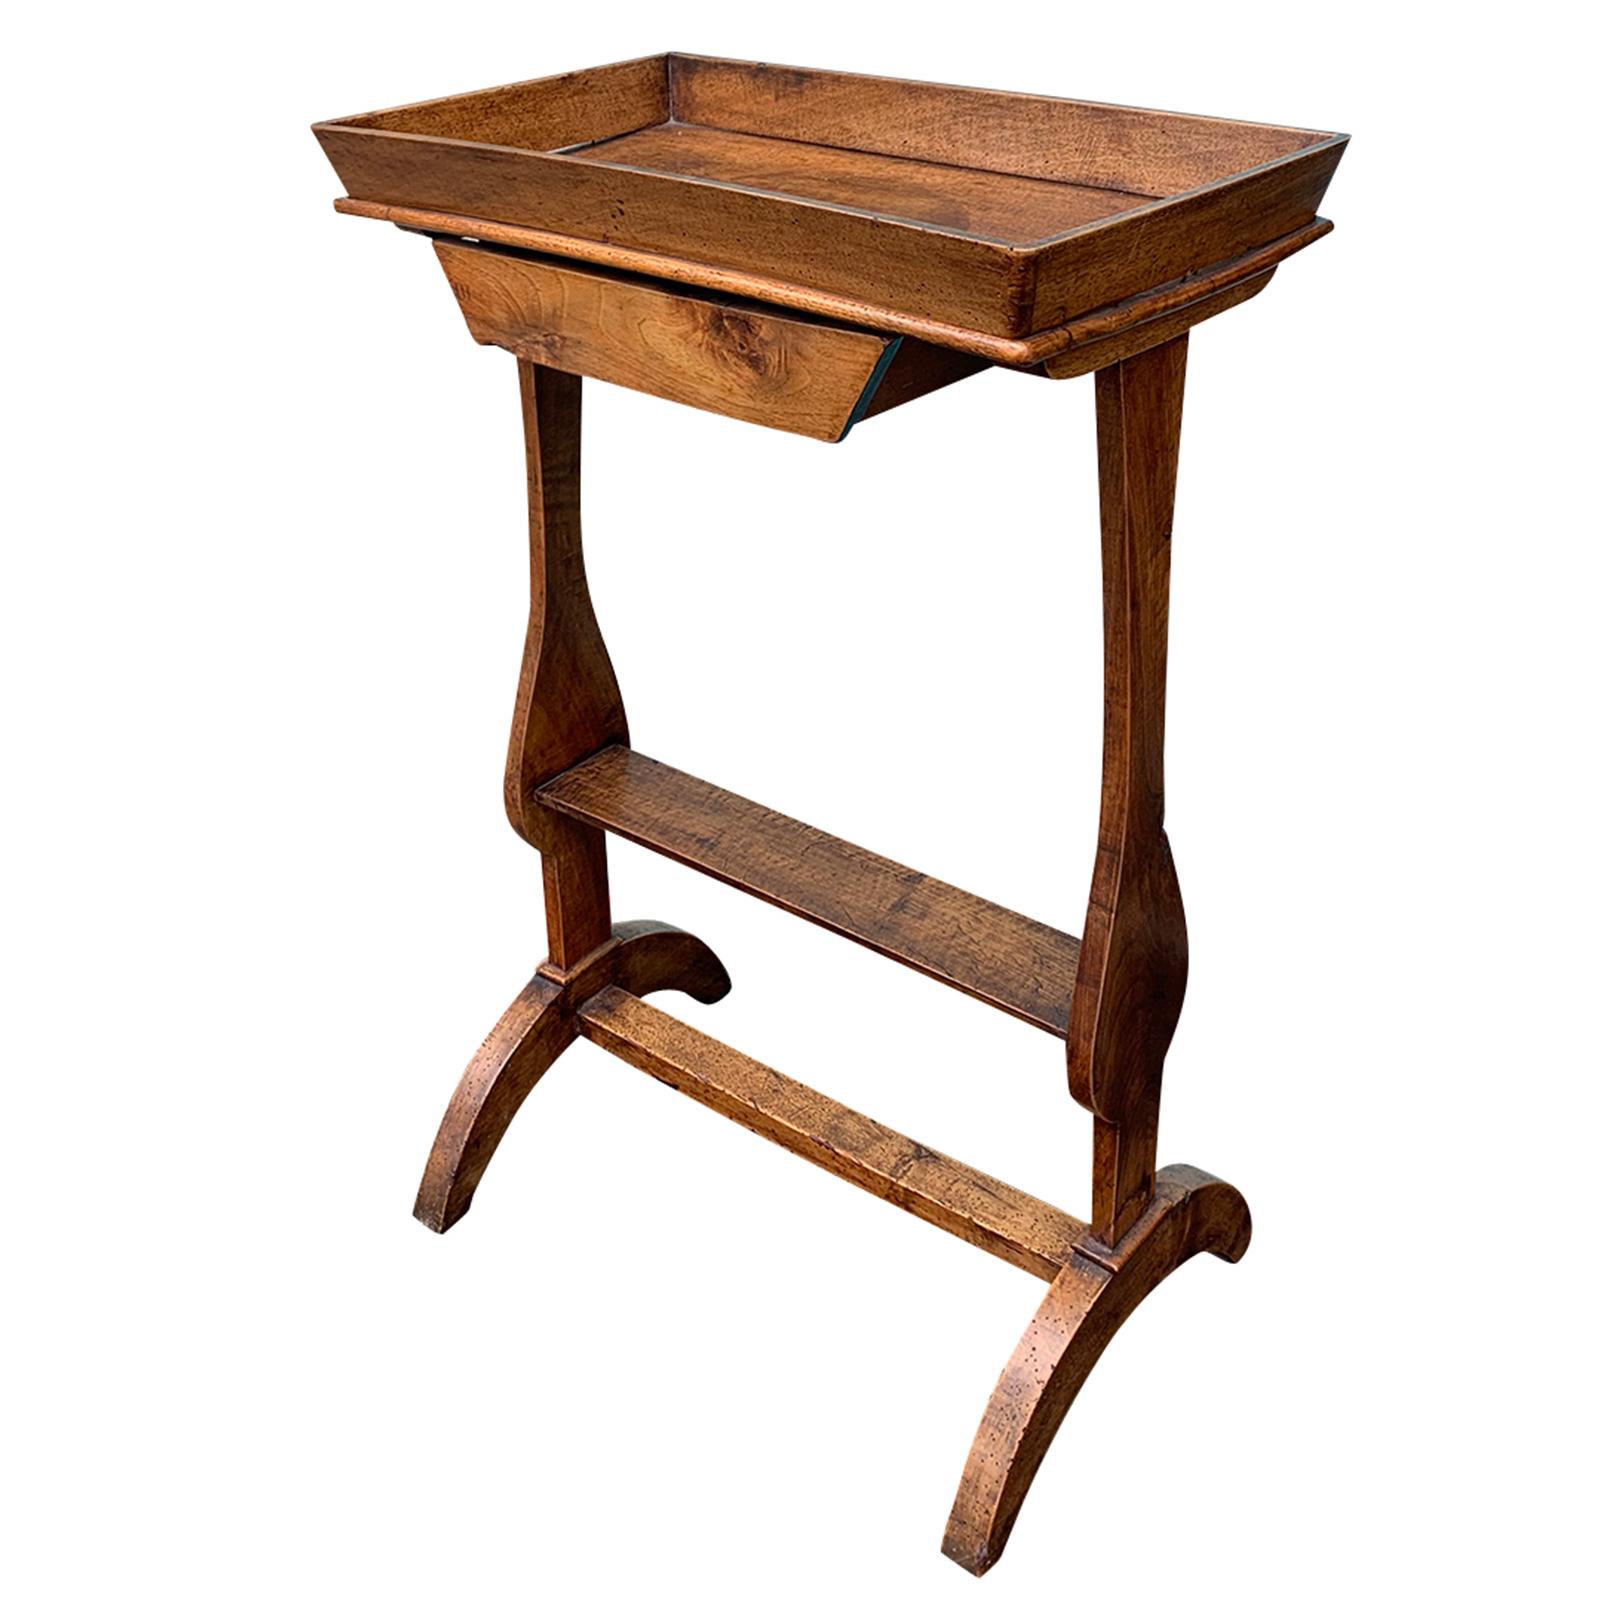 French Small Wooden Table, circa 1810